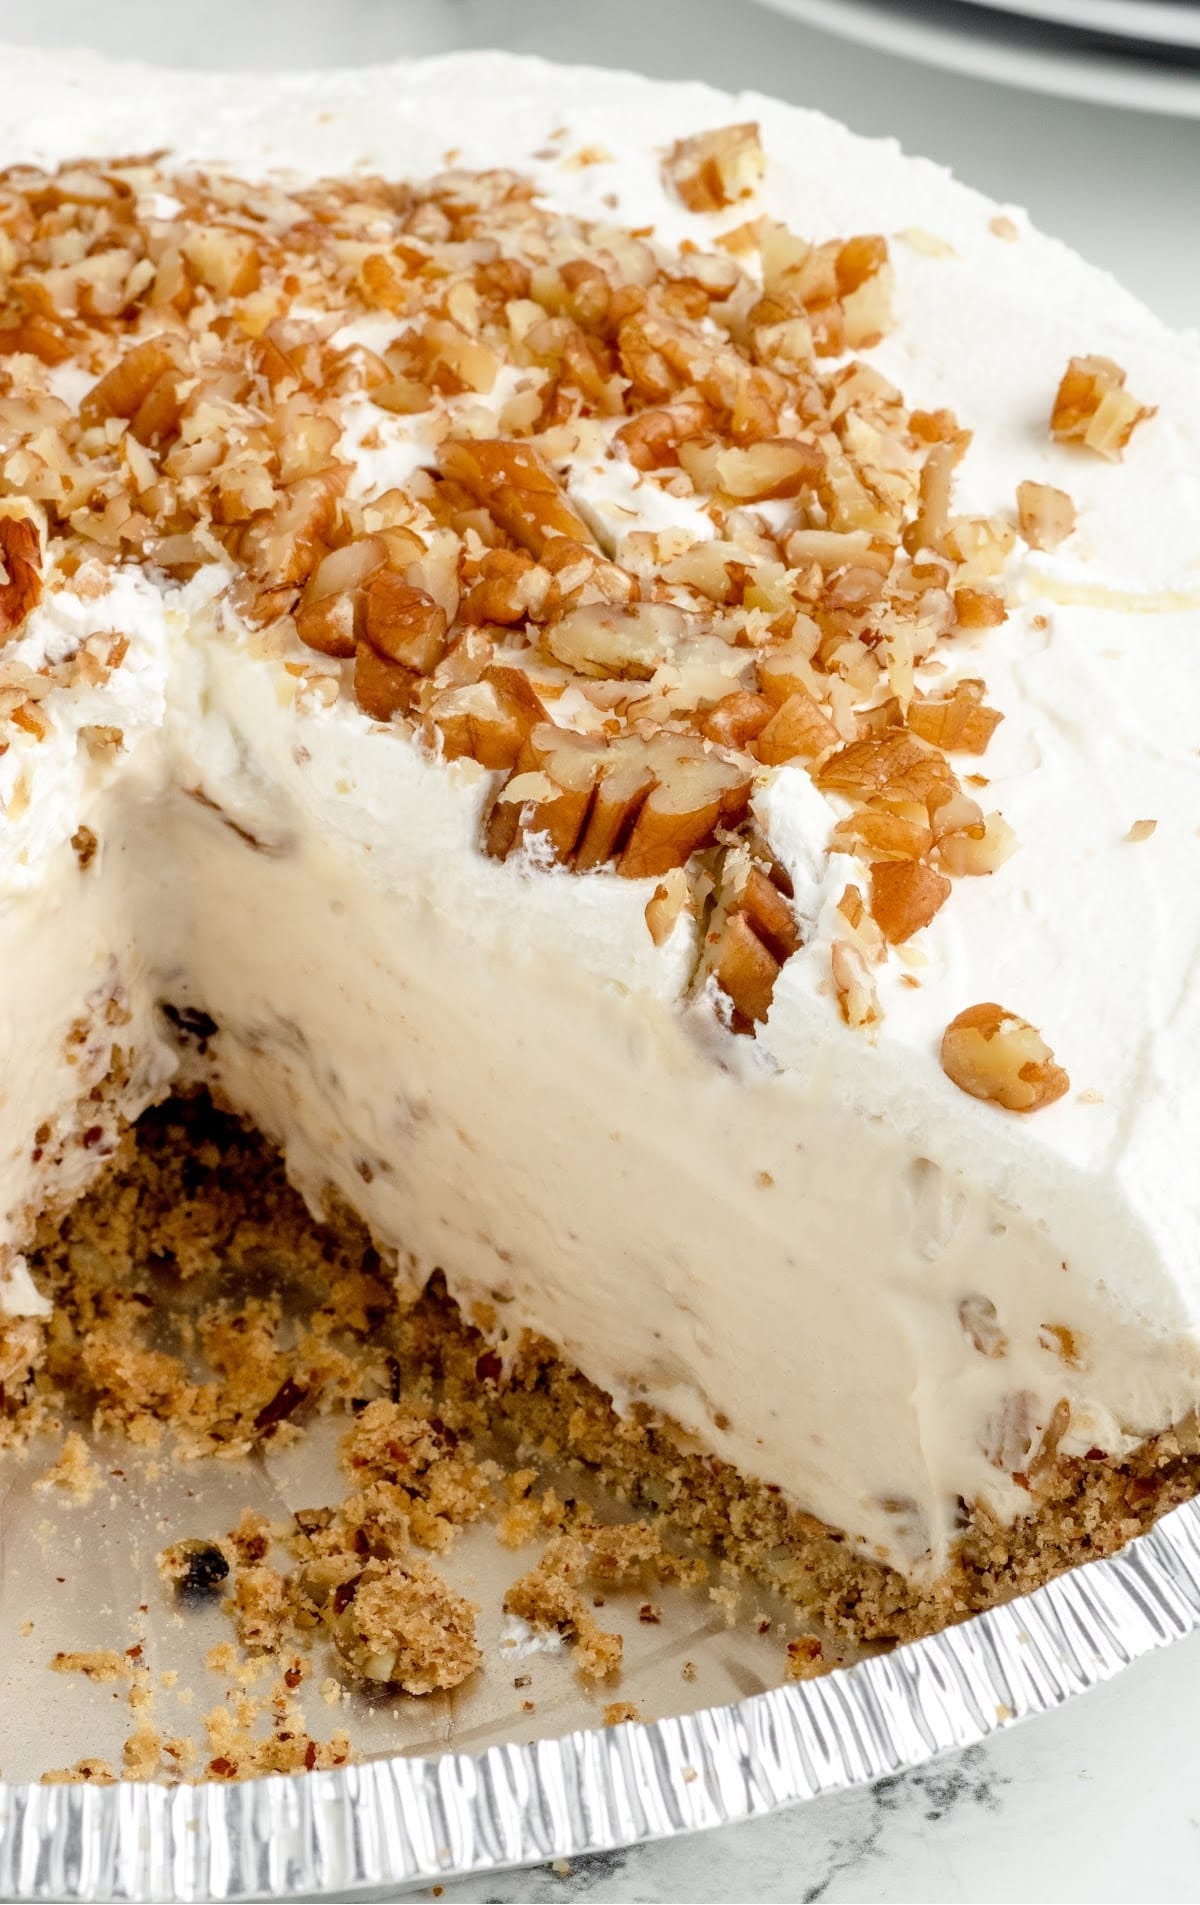 A piece of cake on a plate, with Pecan and Cream